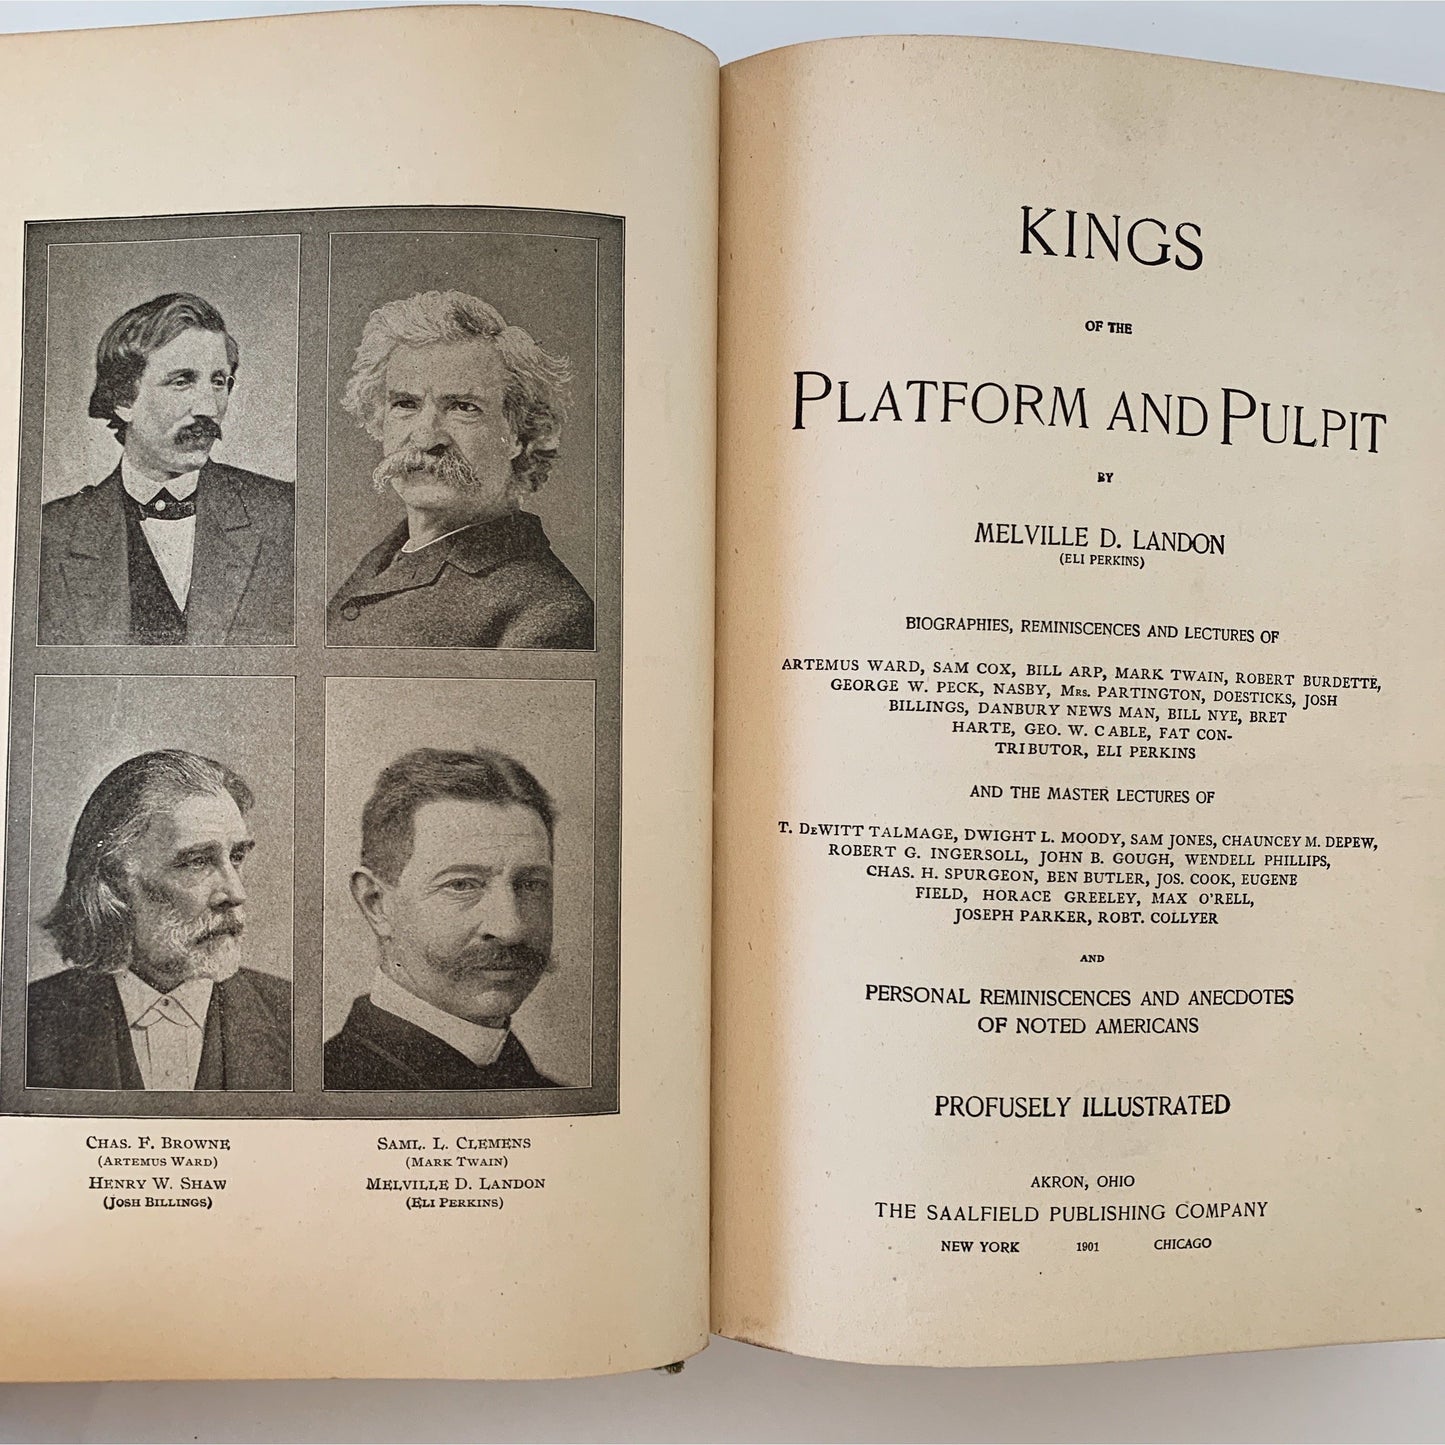 Kings of the Platform and Pulpit, 1901, Biographies, Reminiscences, and Lectures, Illustrated